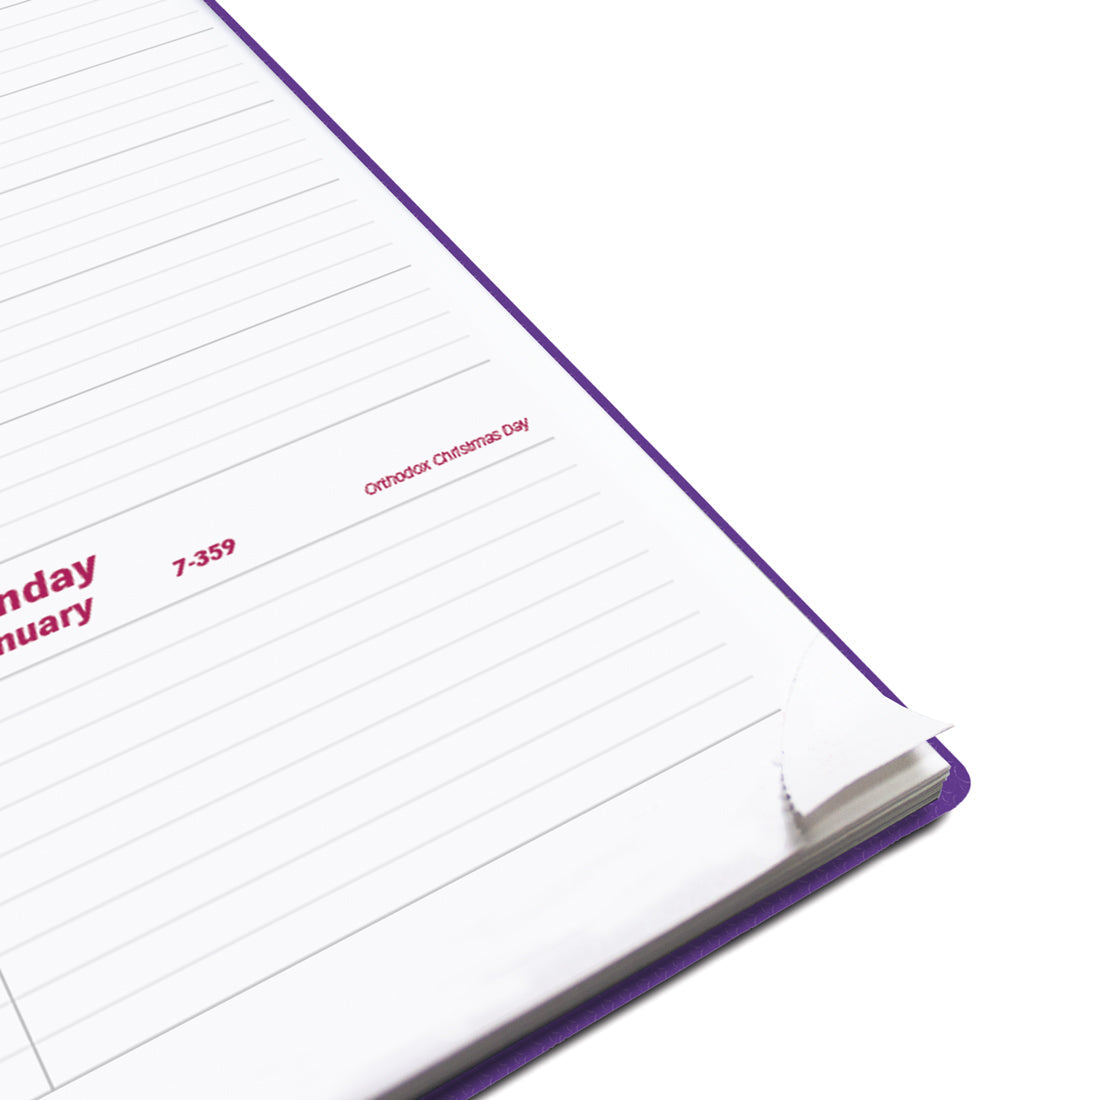 DuraFlex Weekly Appointment Book 2024#colour_purple